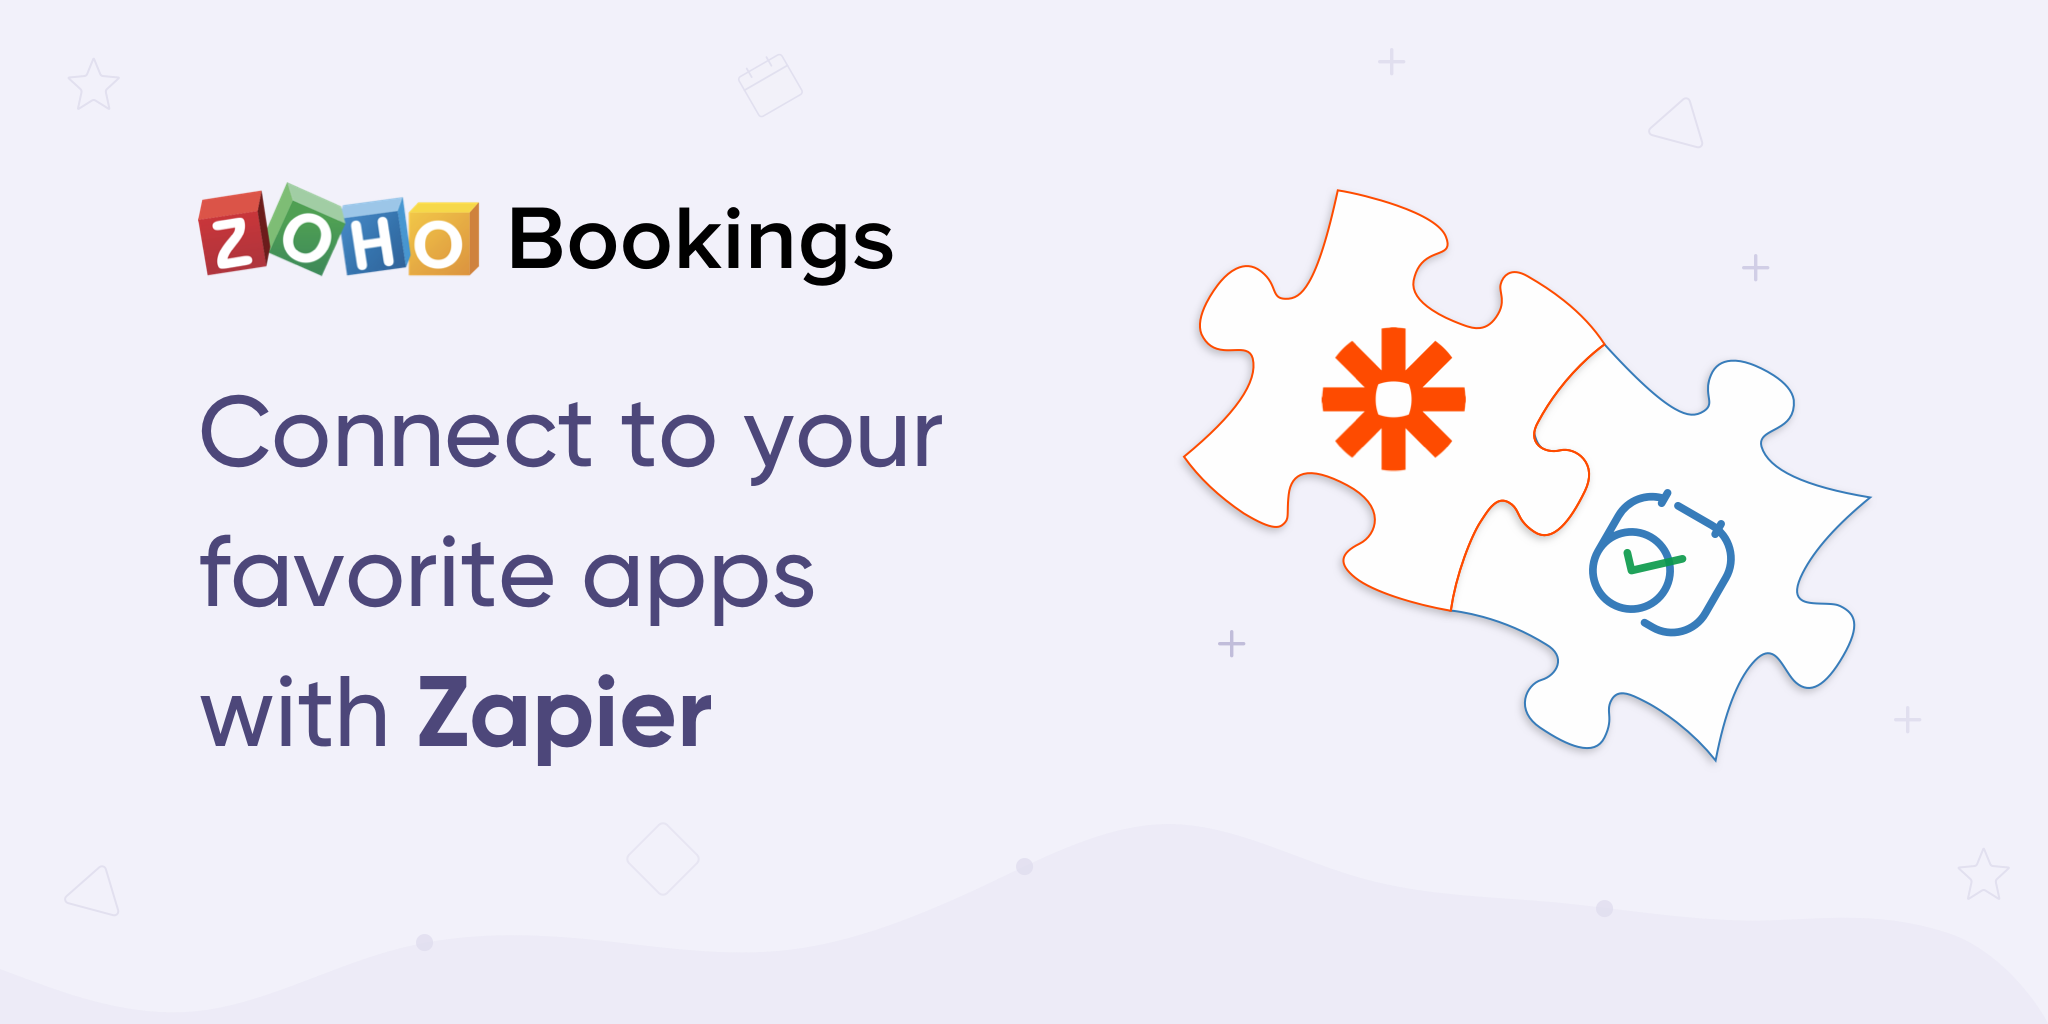 Zoho Bookings adds Zapier to its list of integrations to speed up customers' need for connecting more apps